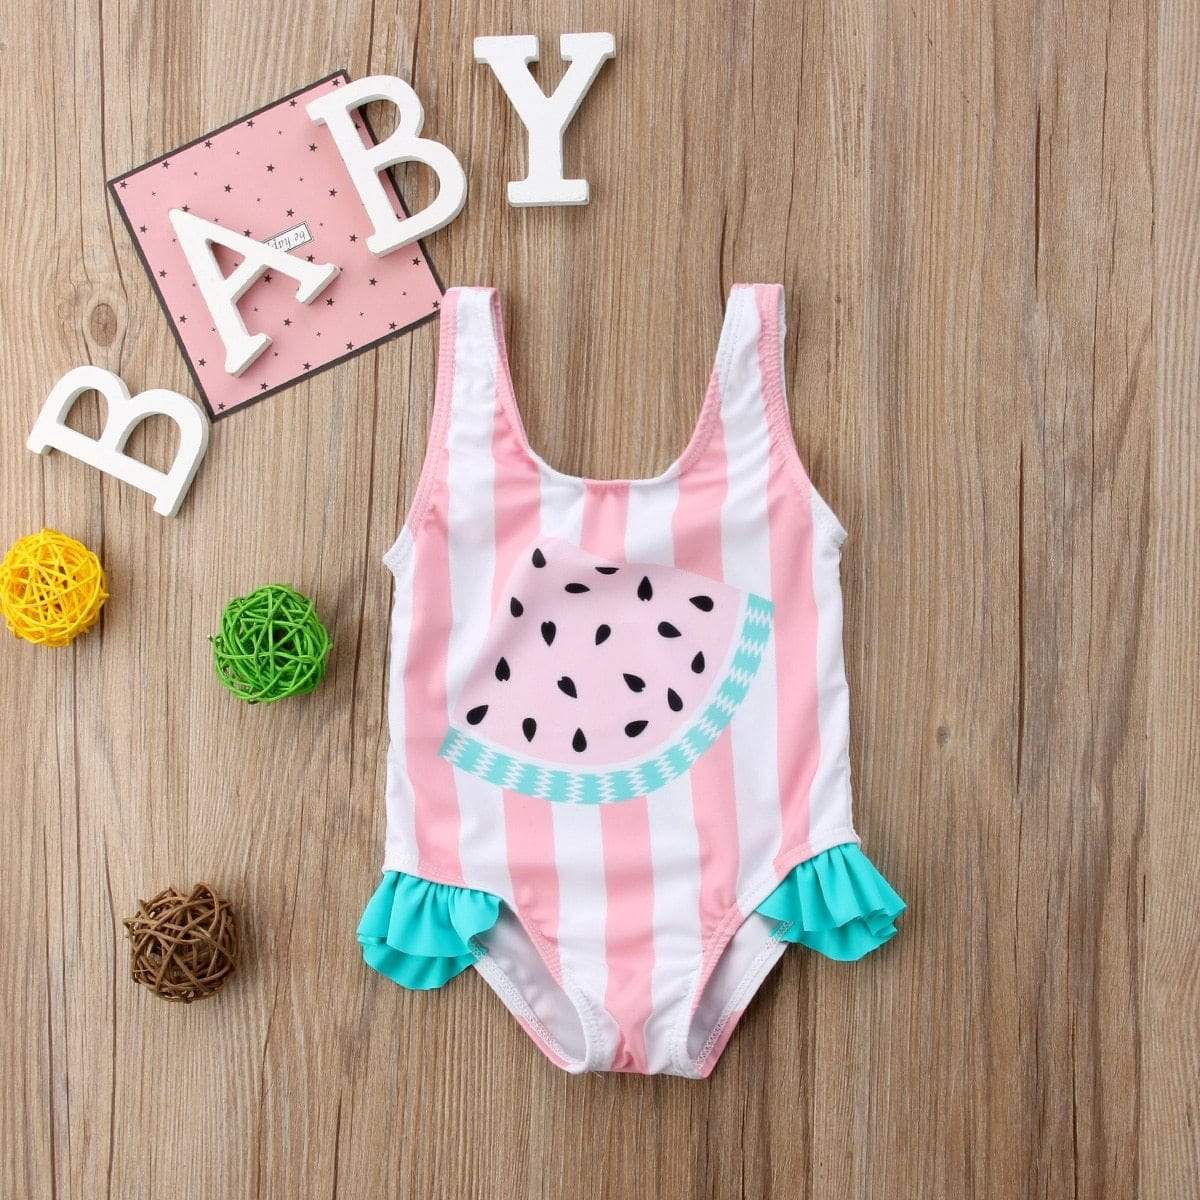 Girl's Clothing Watermelon Striped Swimsuit